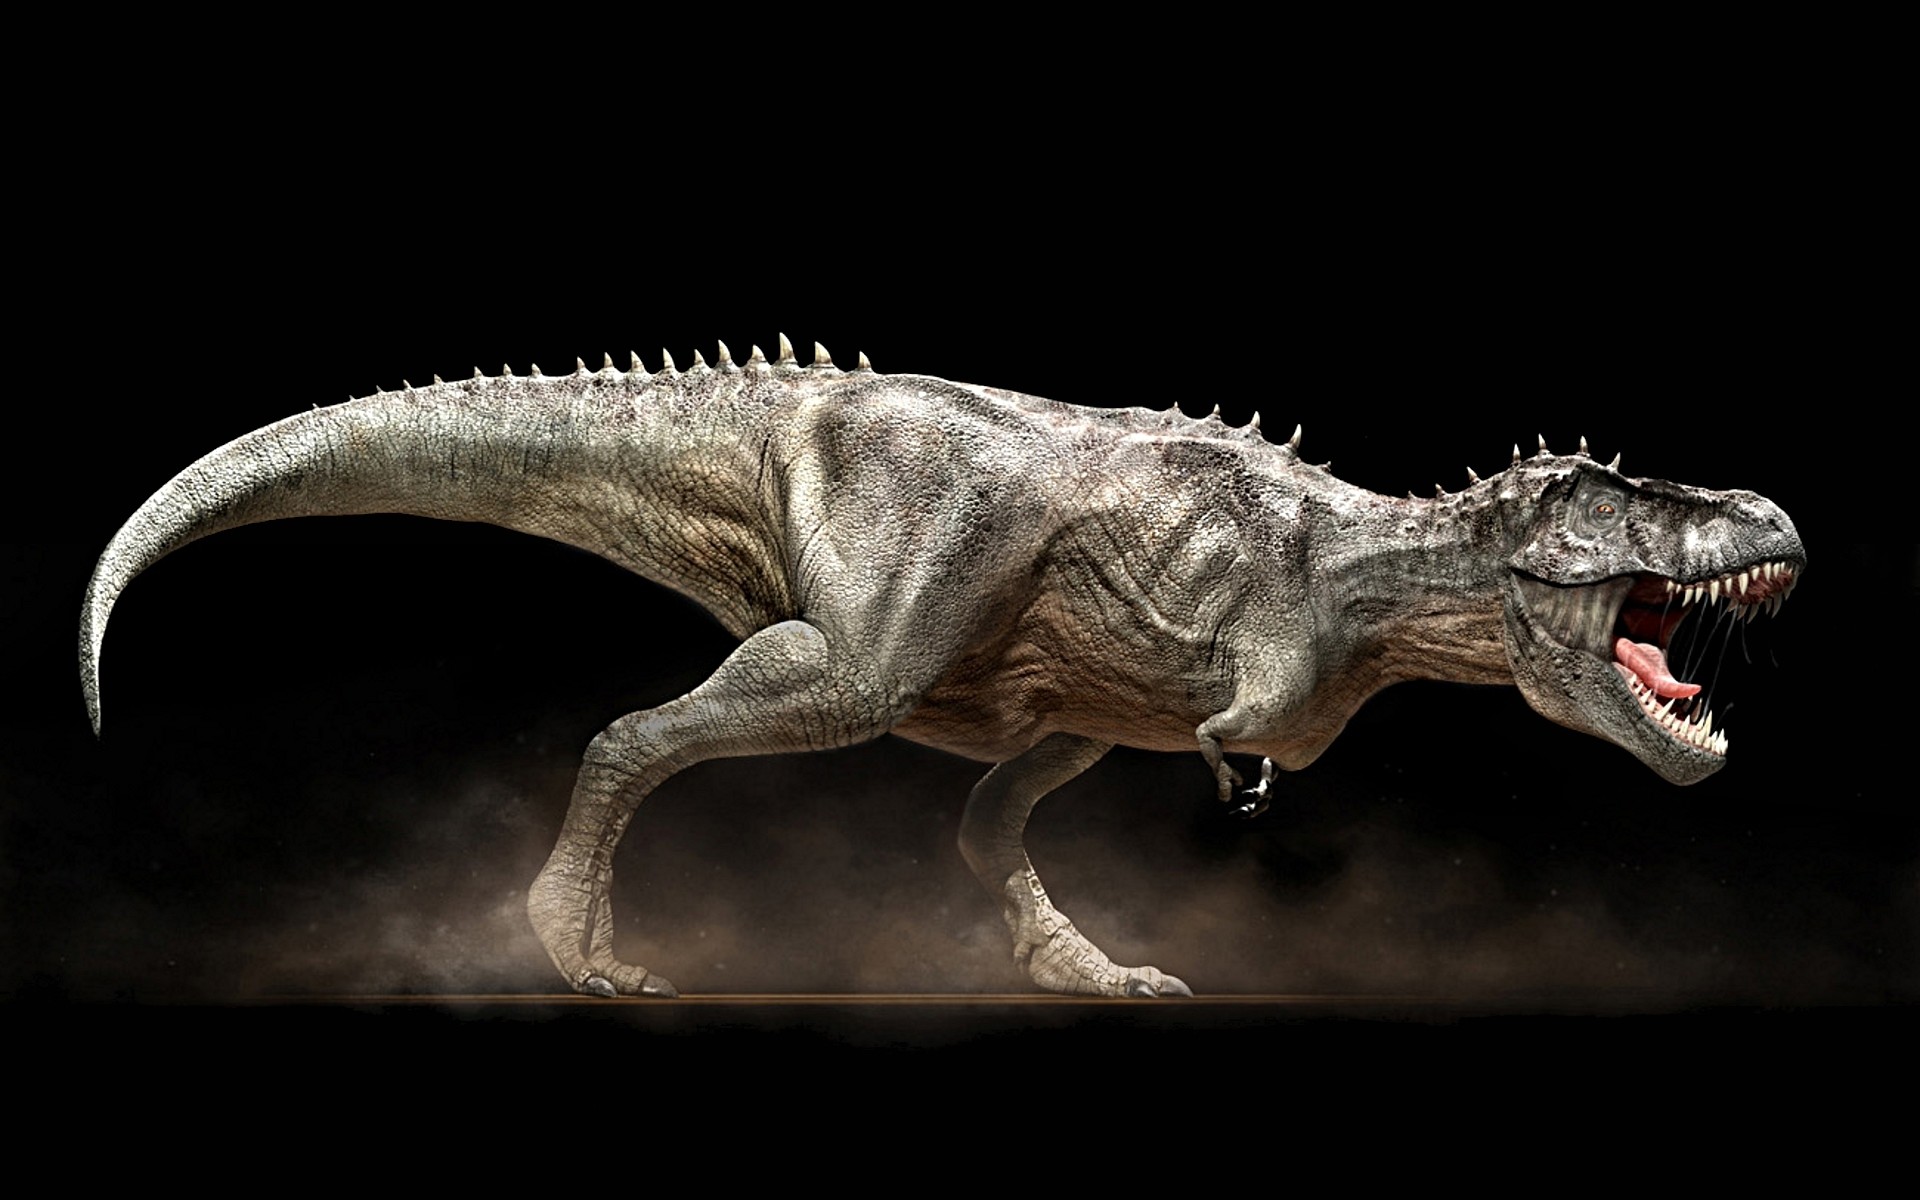 1920x1200 ... Dino T-Rex 3D Live Wallpaper - Android Apps on Google Play ...